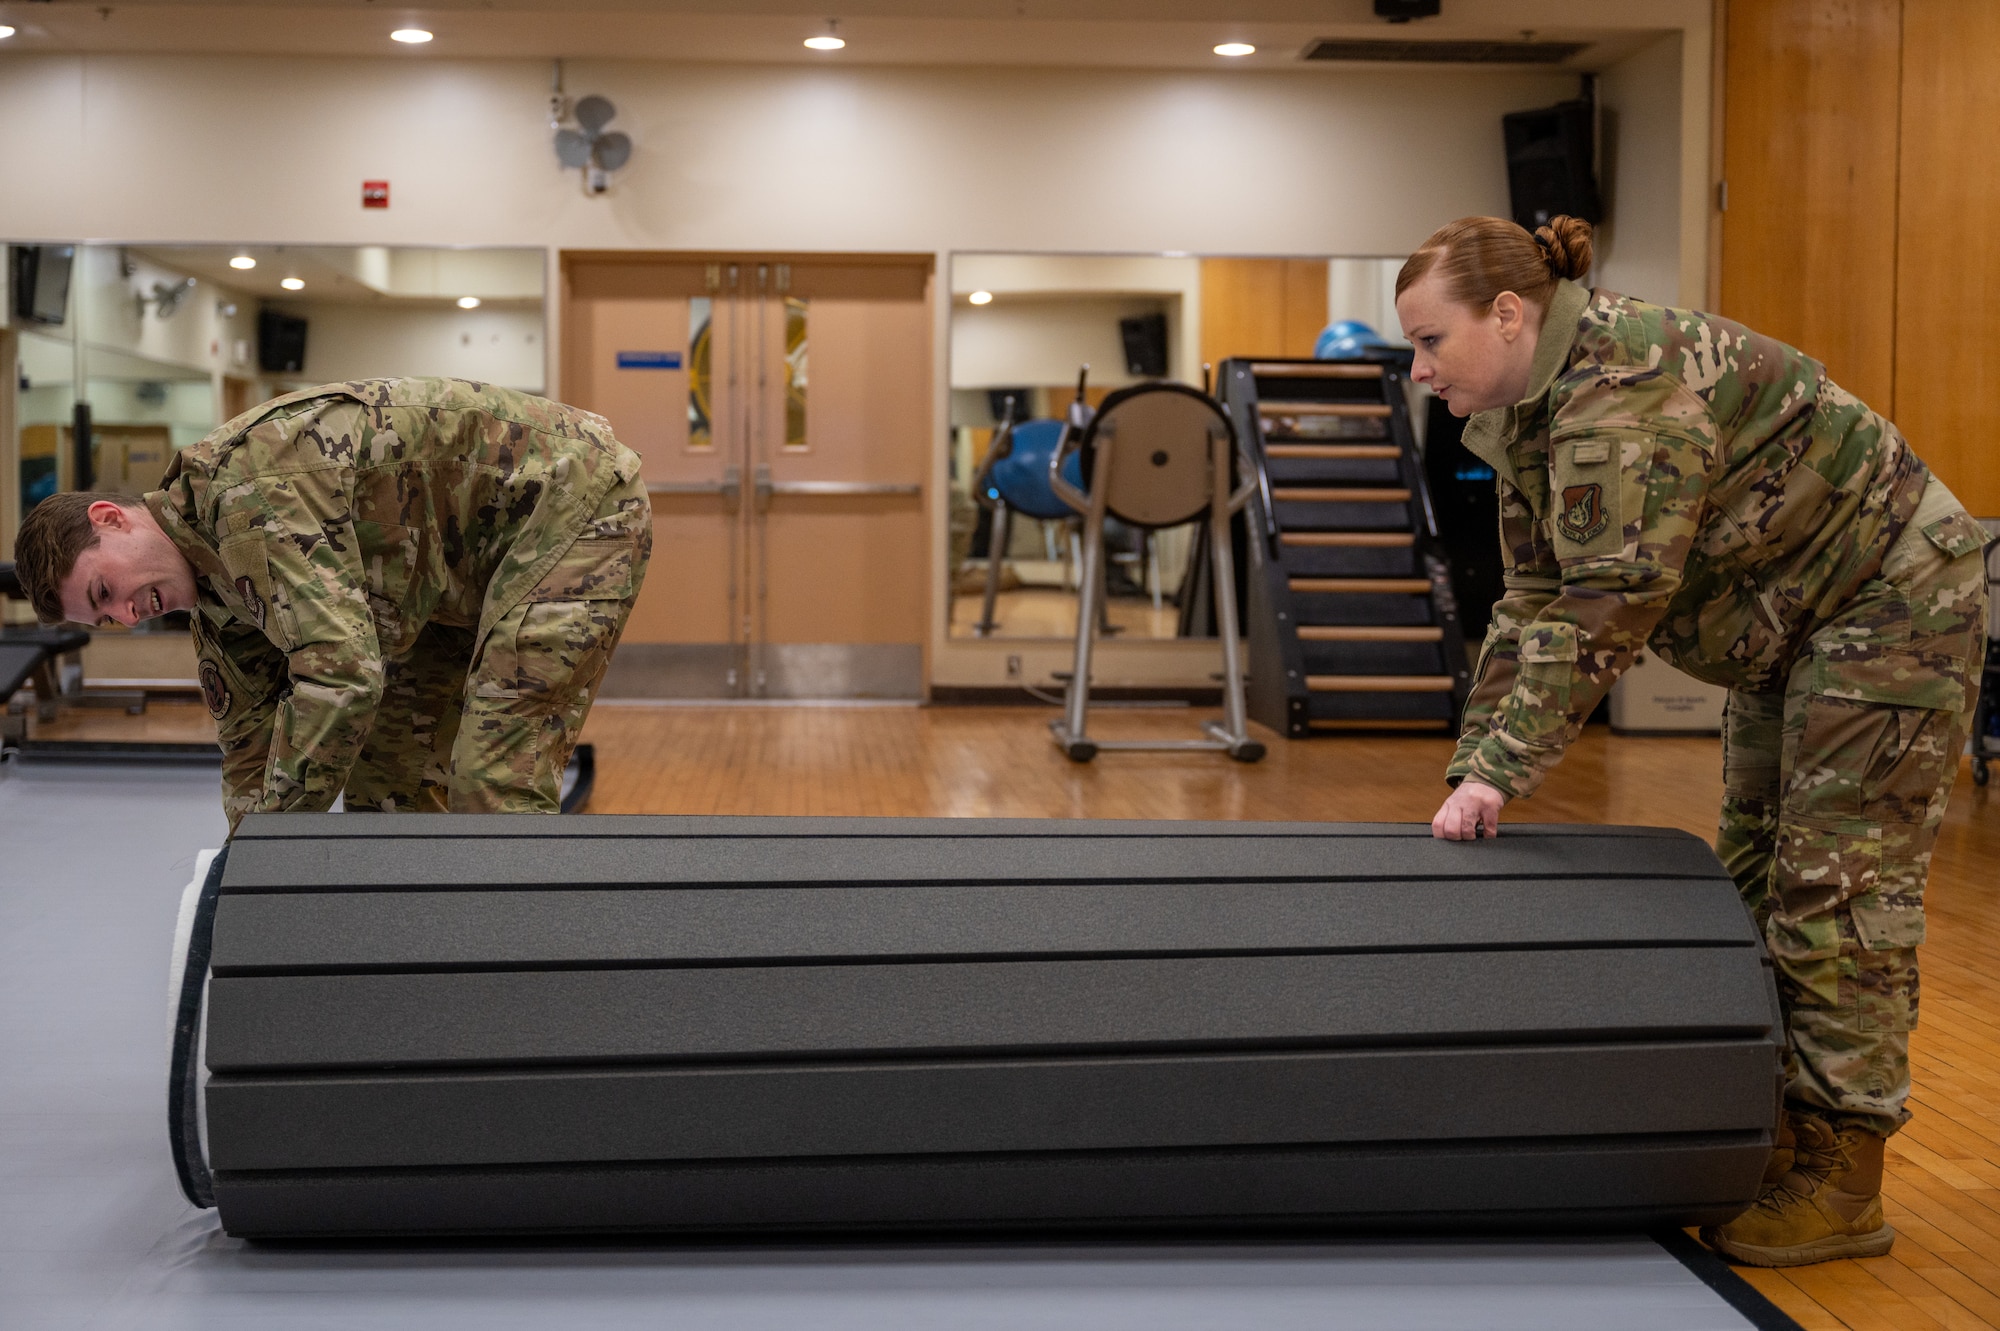 U.S. Air Force 1st Lt. Demetre Fontaine, 621st Air Control Squadron air battle manager, left, and Staff Sgt. Adrian Reardon, 607th Air Operations Center comptroller, unroll a mat before a combatives instructor certification course at Osan Air Base, Republic of Korea, Feb. 23, 2024. Certifying Airmen as combatives instructors enhances operational efficiency by enabling the widespread dissemination of essential combat readiness skills throughout the installation. The 621st ACS and 607th AOC intend to utilize the new certifications to tailor a combatives program to their operational needs and enhance their ability to support the 51st Fighter Wing during training and contingencies. (U.S. Air Force photo by Airman 1st Class Chase Verzaal)